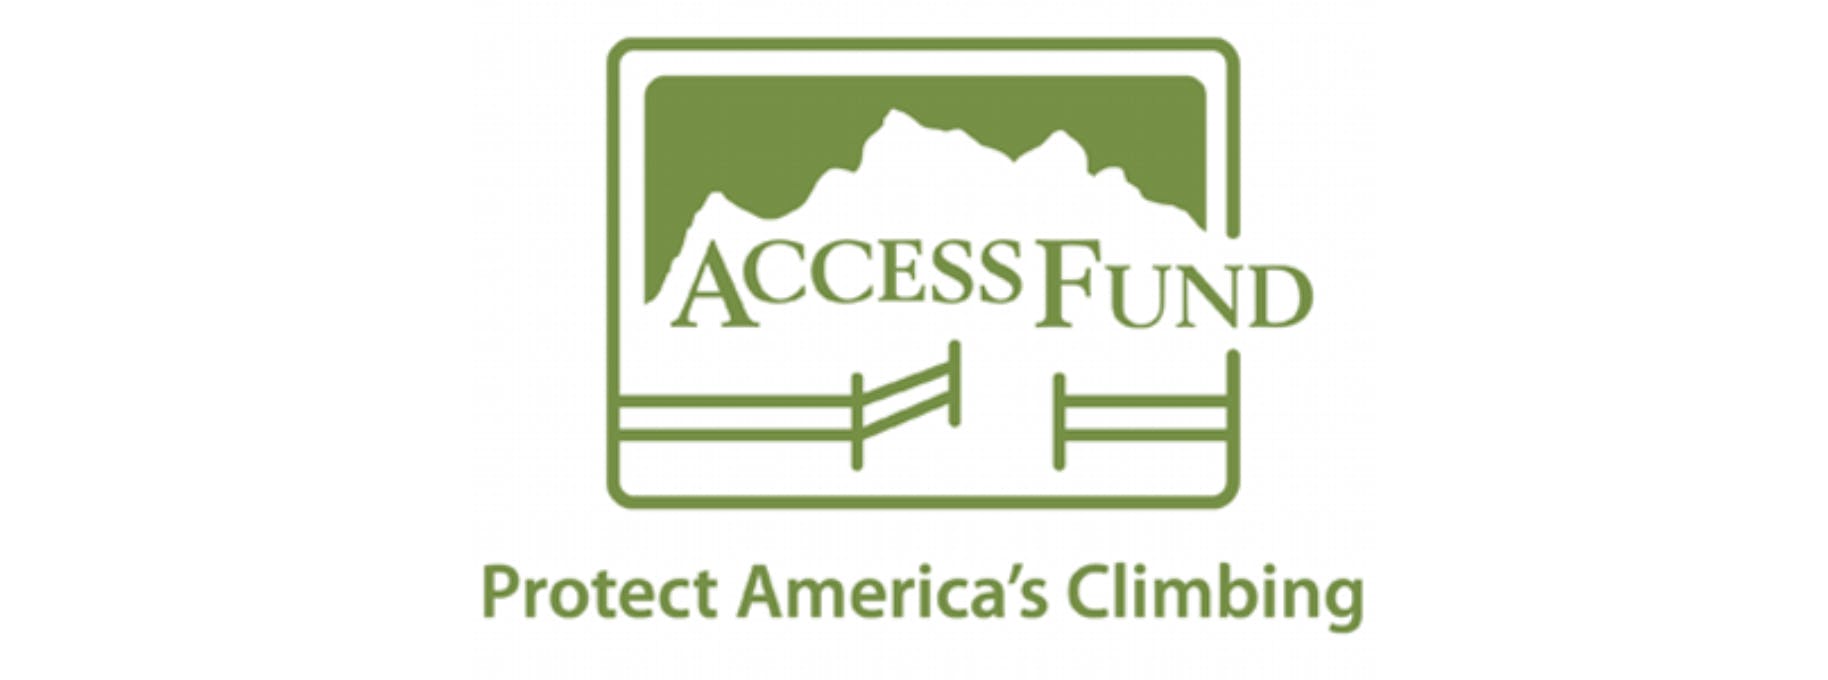 The logo for The Access Fund. 